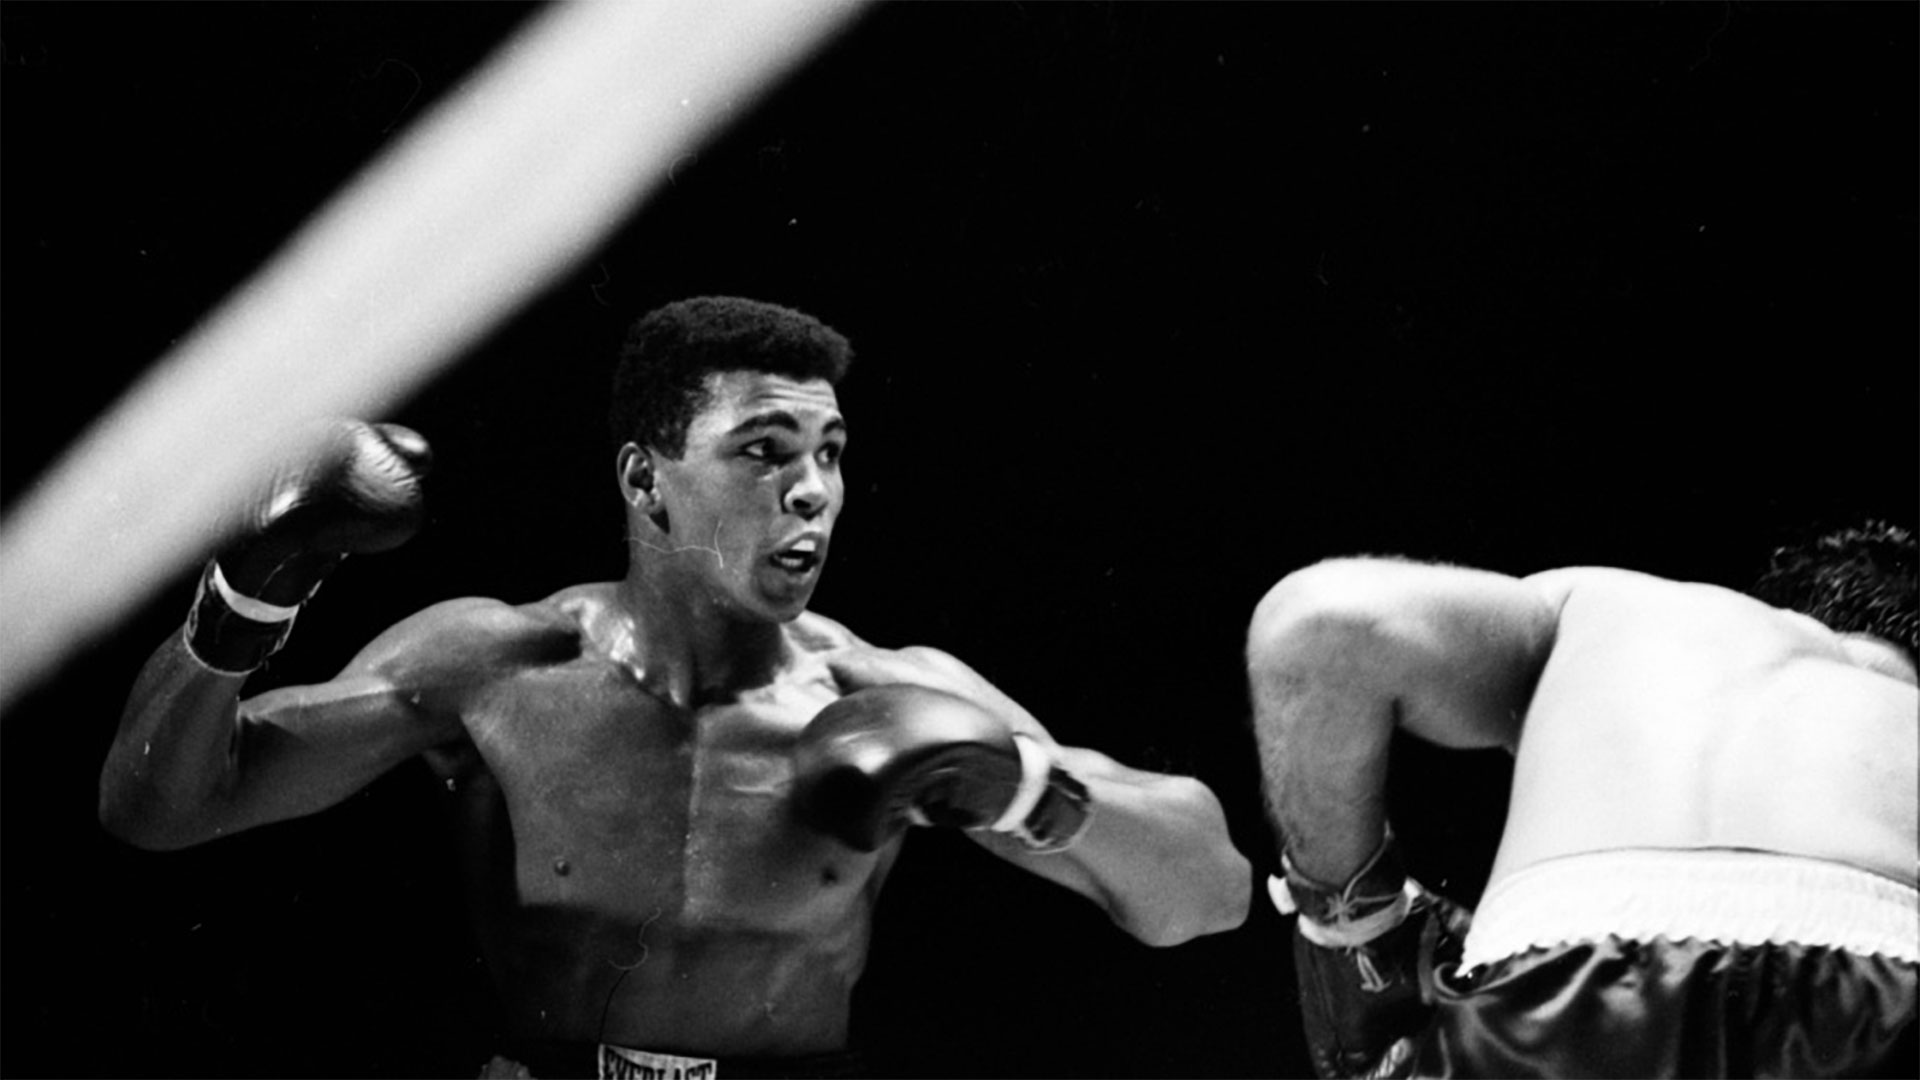 Muhammad Ali refused to be drafted into which war?